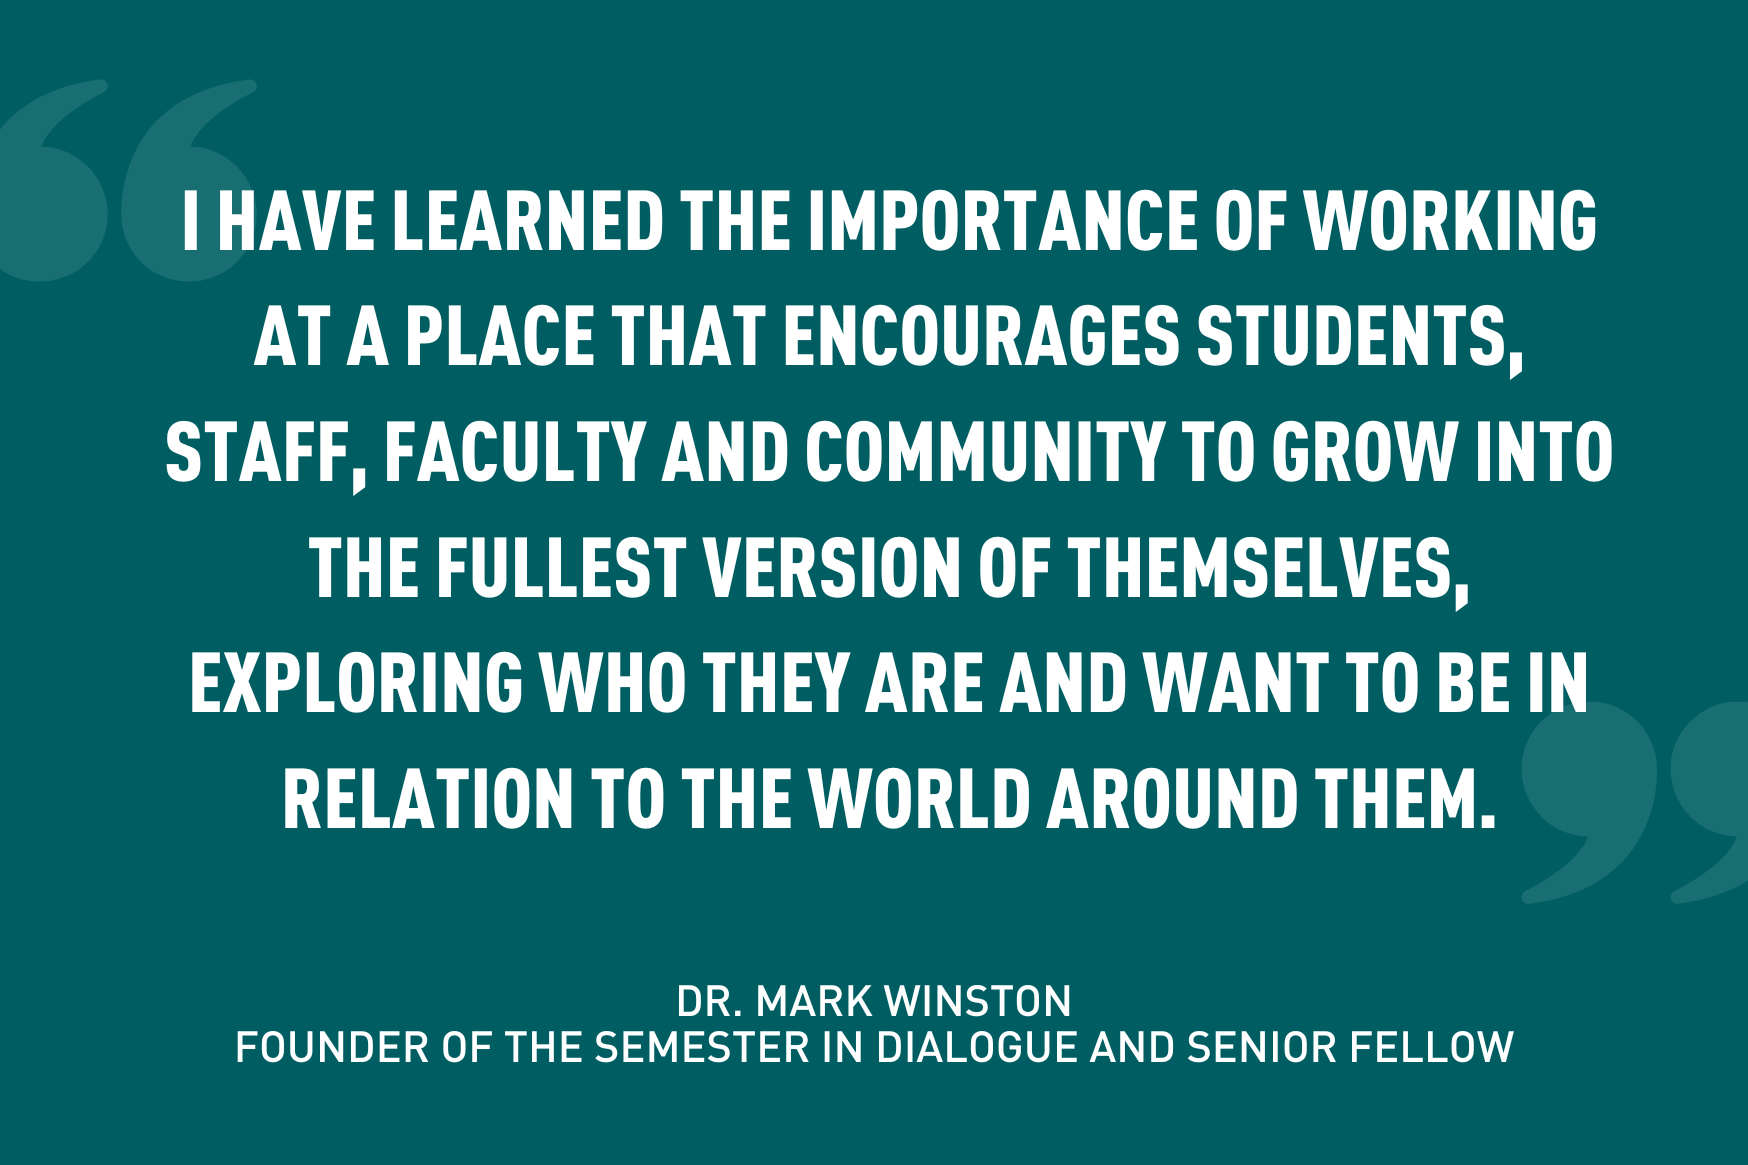 "I have learned the importance of working at a place that encourages students, staff, faculty and community to grow into the fullest version of themselves, exploring who they are and want to be in relation to the world around them" quote, white text on teal background